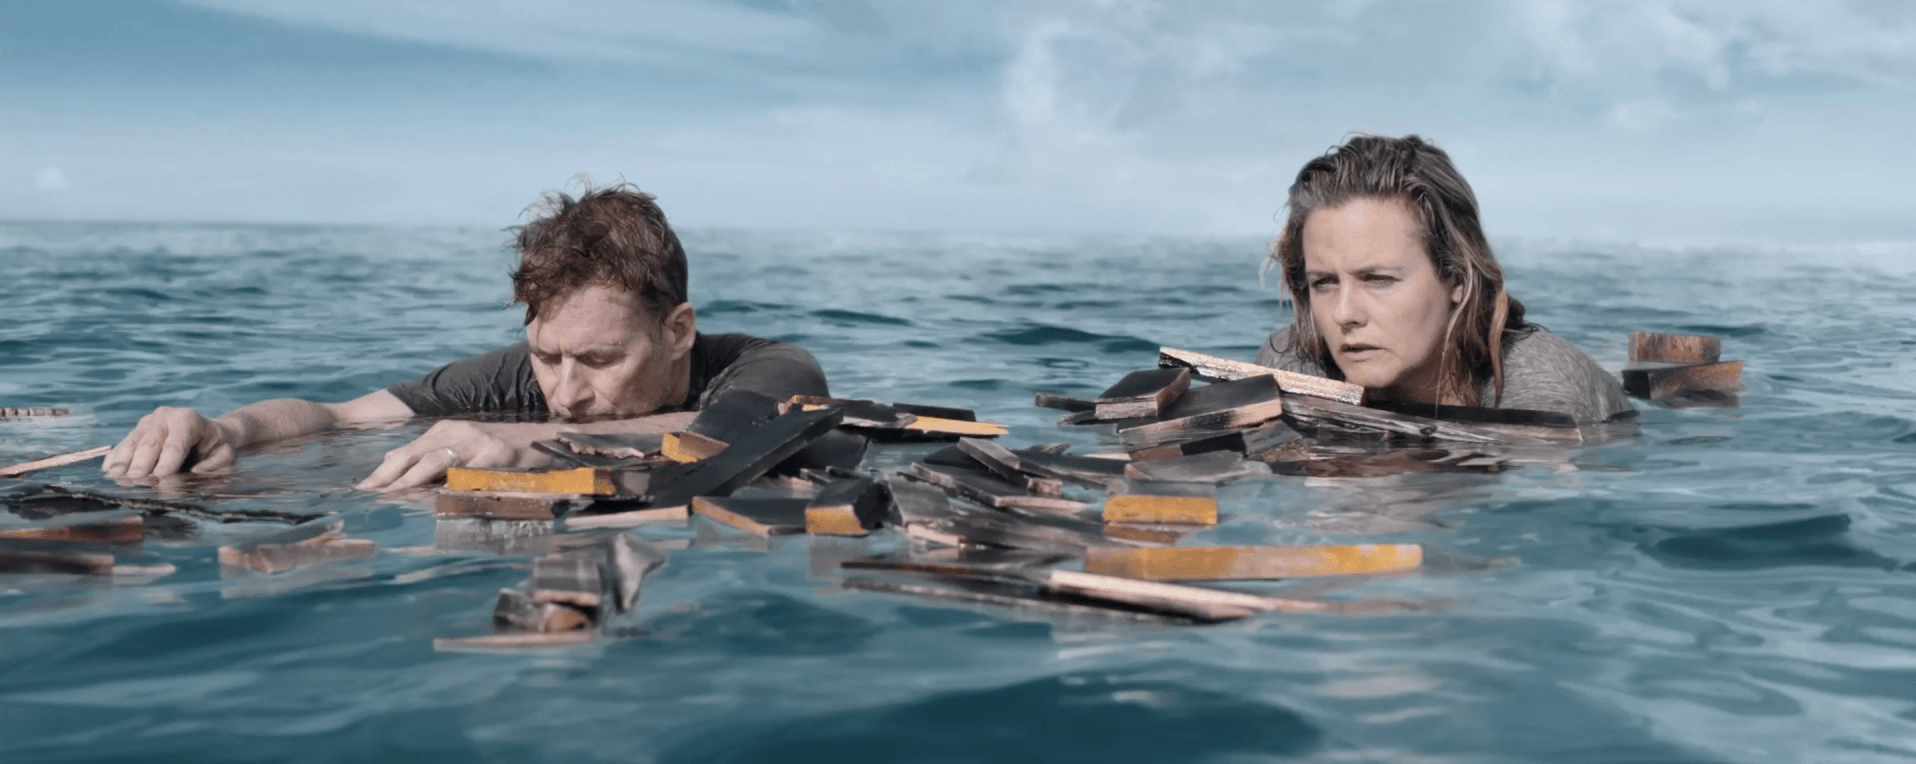 Alicia Silverstone and James Tupper on driftwood in the ocean